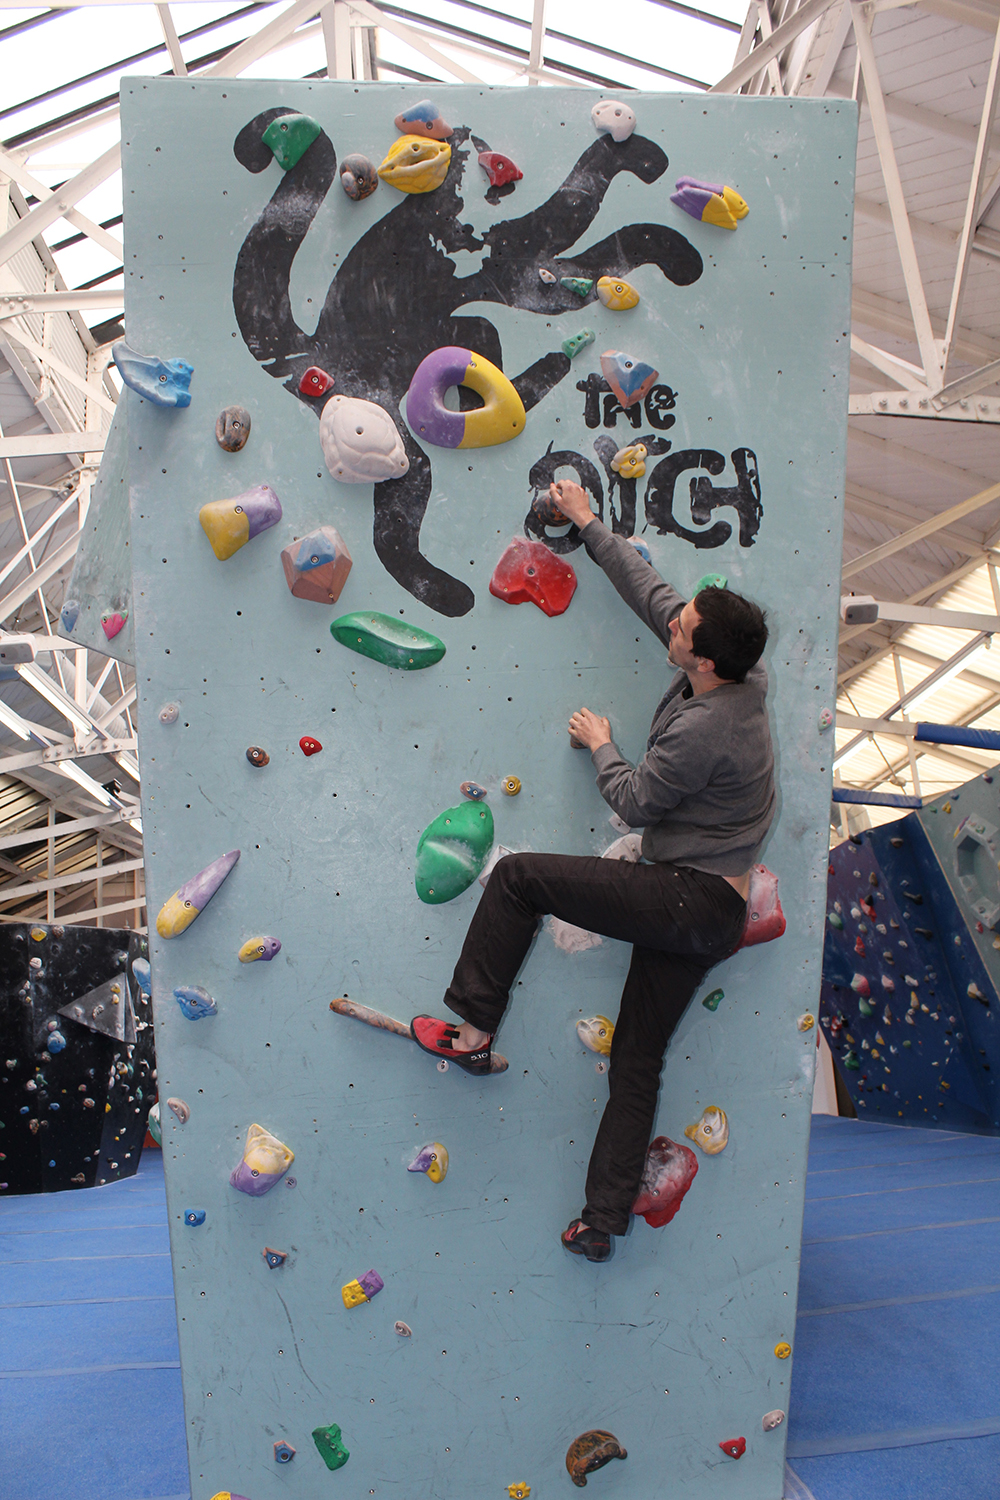 Fred Stone founder of The Arch standing climbing a climbing wall in the Biscuit Factory at Workspace®.